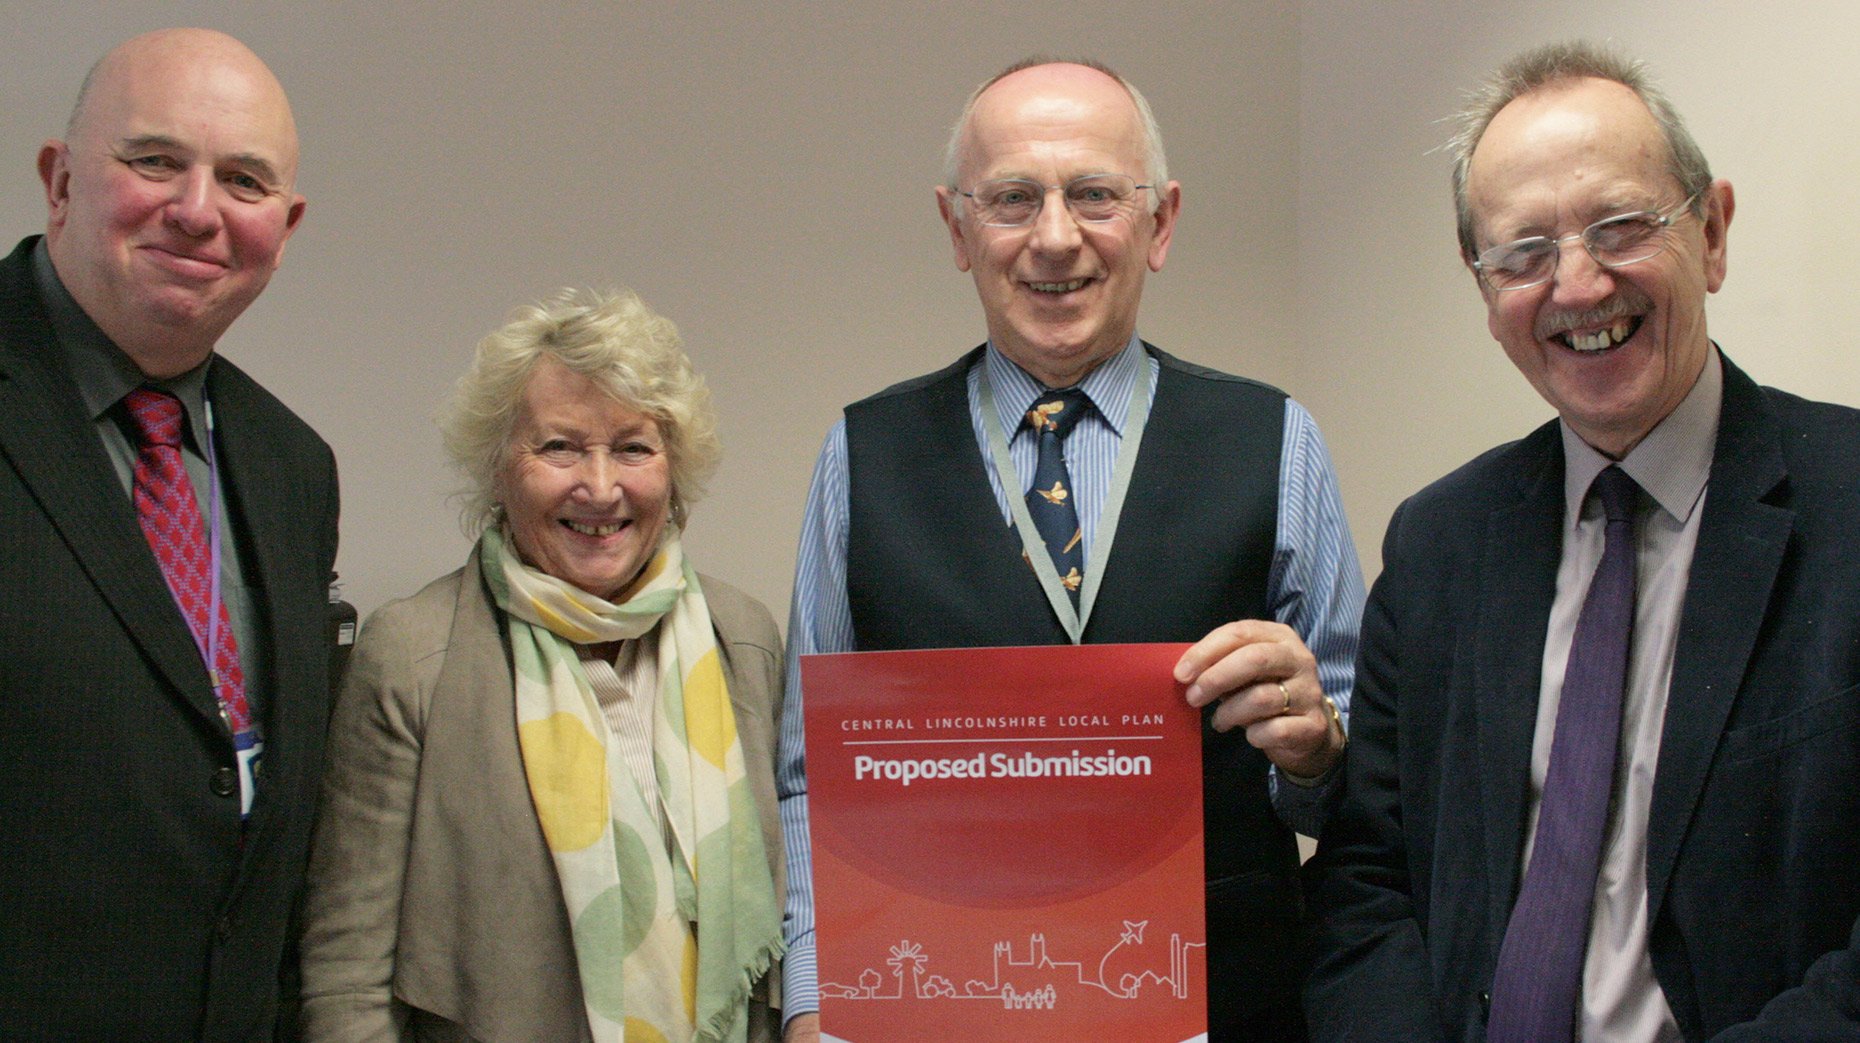 Publication Draft Local Plan launched by Councillor Colin Davie, Councillor Mrs Pat Woodman, Councillor Jeff Summers and Councillor Ric Metcalfe